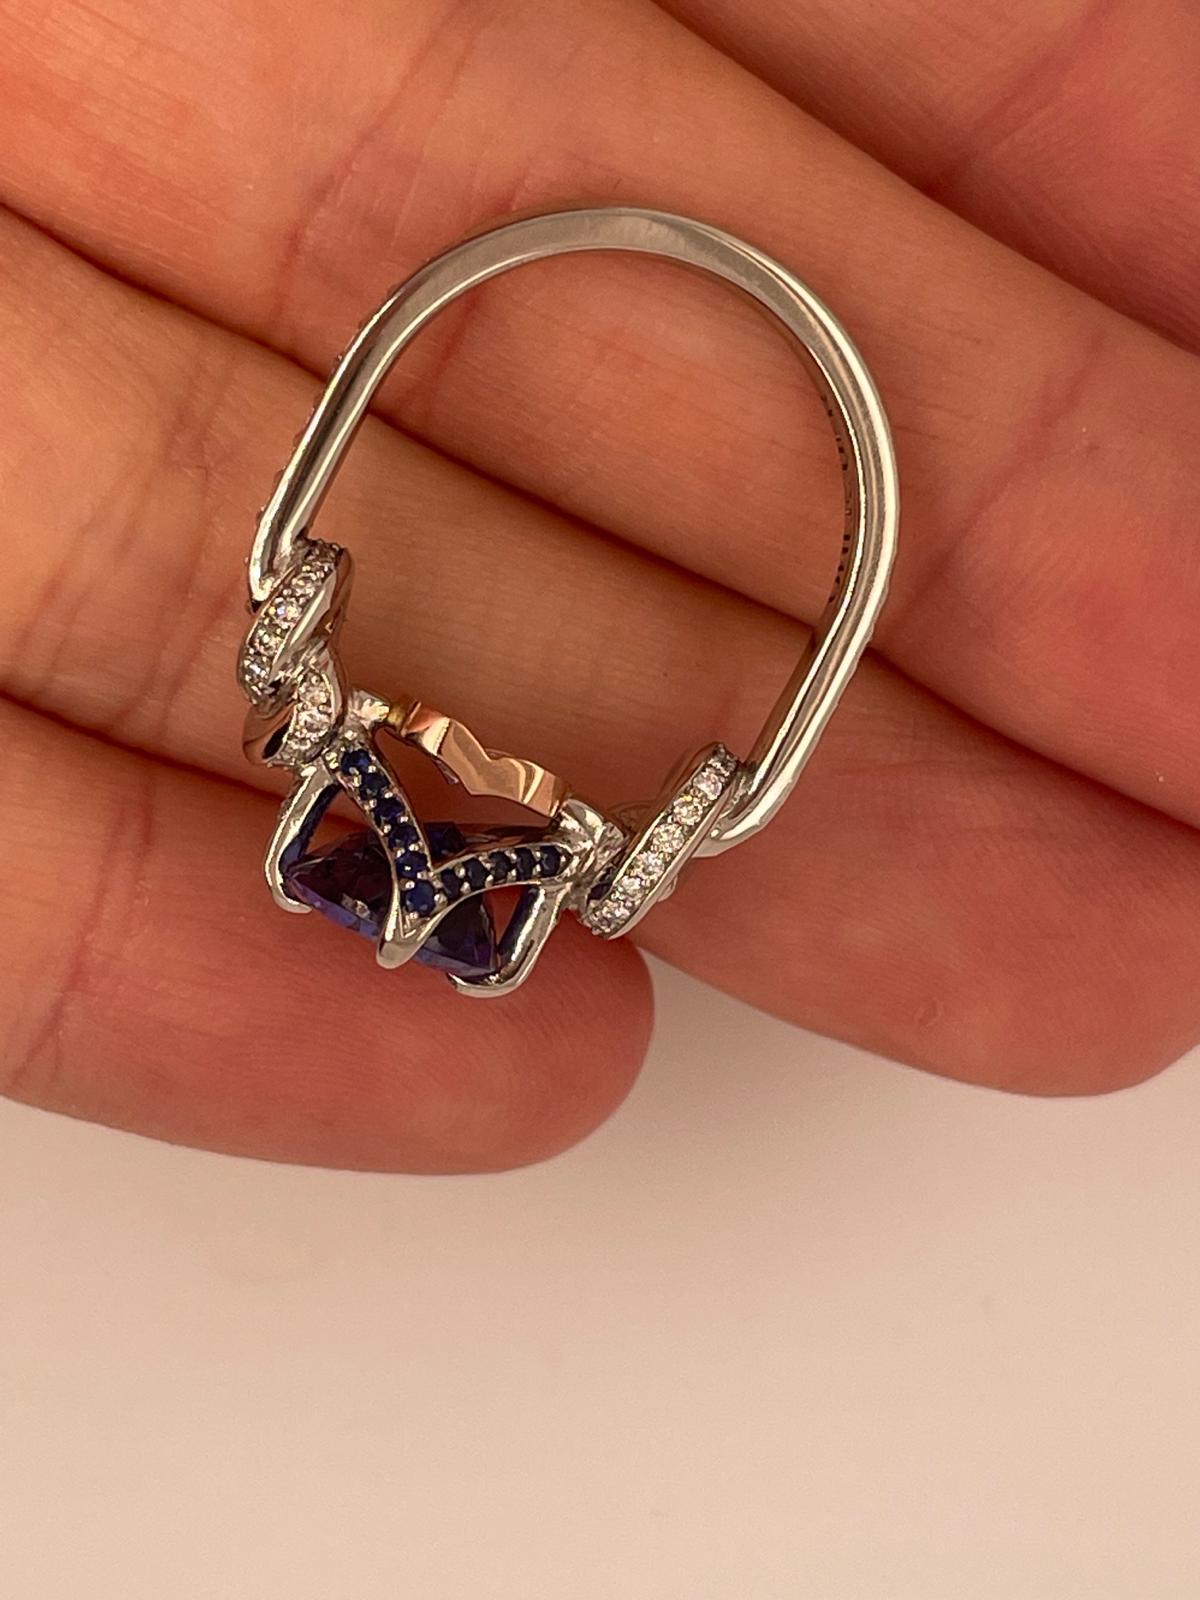 For Sale:  2ct tanzanite and diamond ring in platinum and rose gold  Forget me knot ring  8